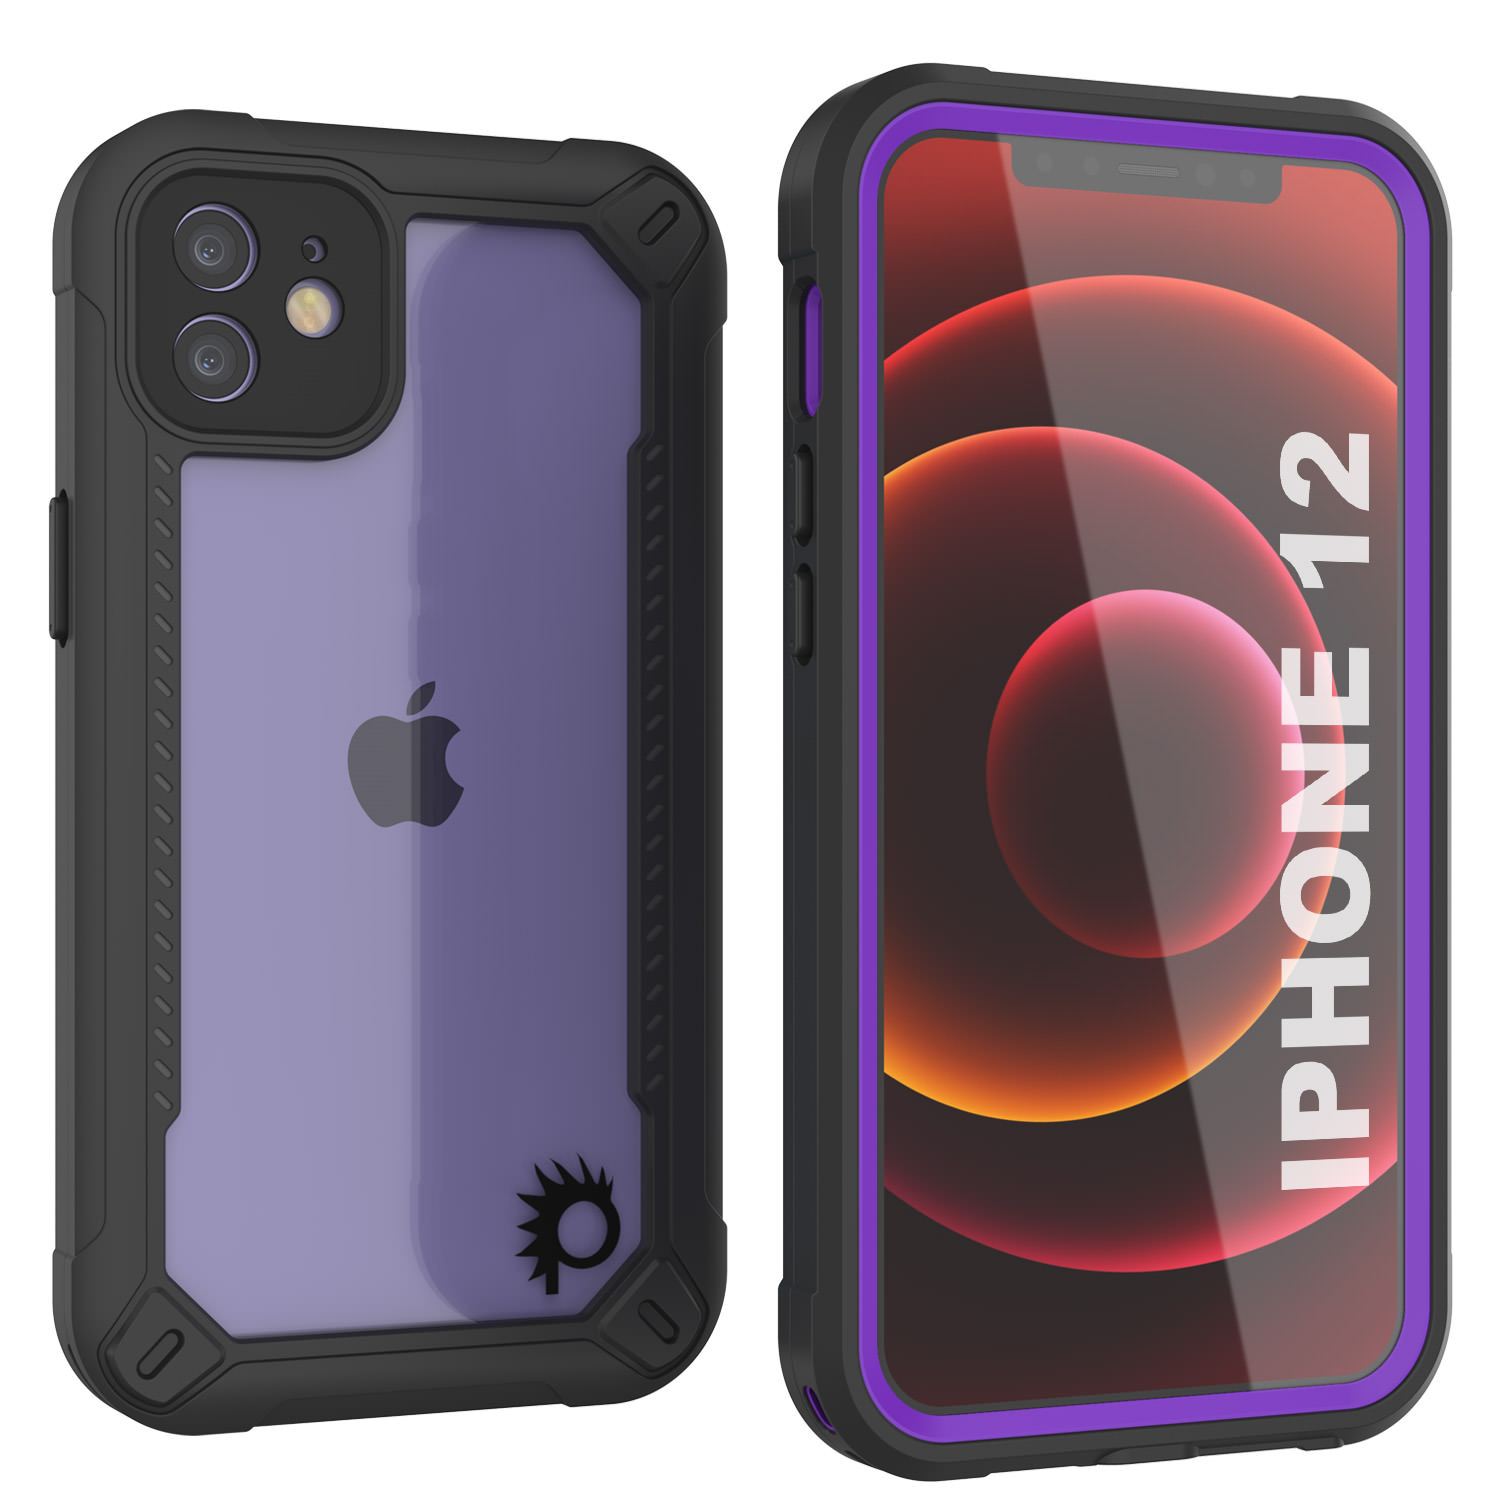 iPhone 12 Waterproof IP68 Case, Punkcase [Purple]  [Maximus Series] [Slim Fit] [IP68 Certified] [Shockresistant] Clear Armor Cover with Screen Protector | Ultimate Protection